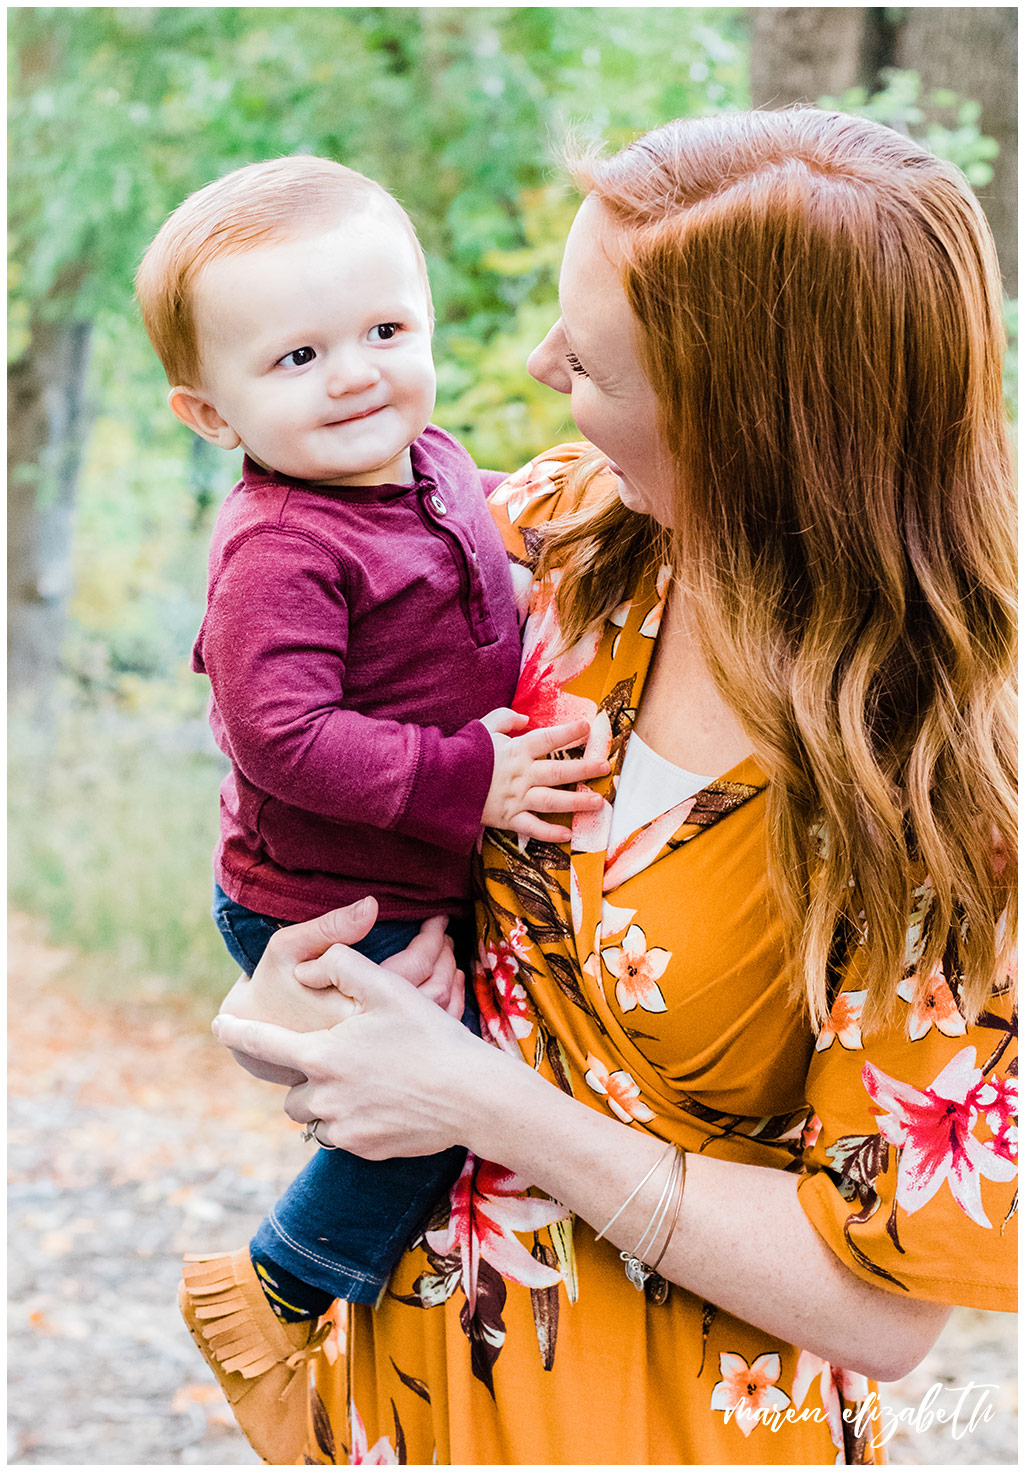 Utah Fall Mini Sessions 2018 | Did you know October is the busiest month for family pictures in utah? It's because everyone wants the fall colors in our canyons. Make sure you plan ahead to schedule your family picture session timed perfectly with the best fall colors. | Maren Elizabeth Photography | Utah Photographer